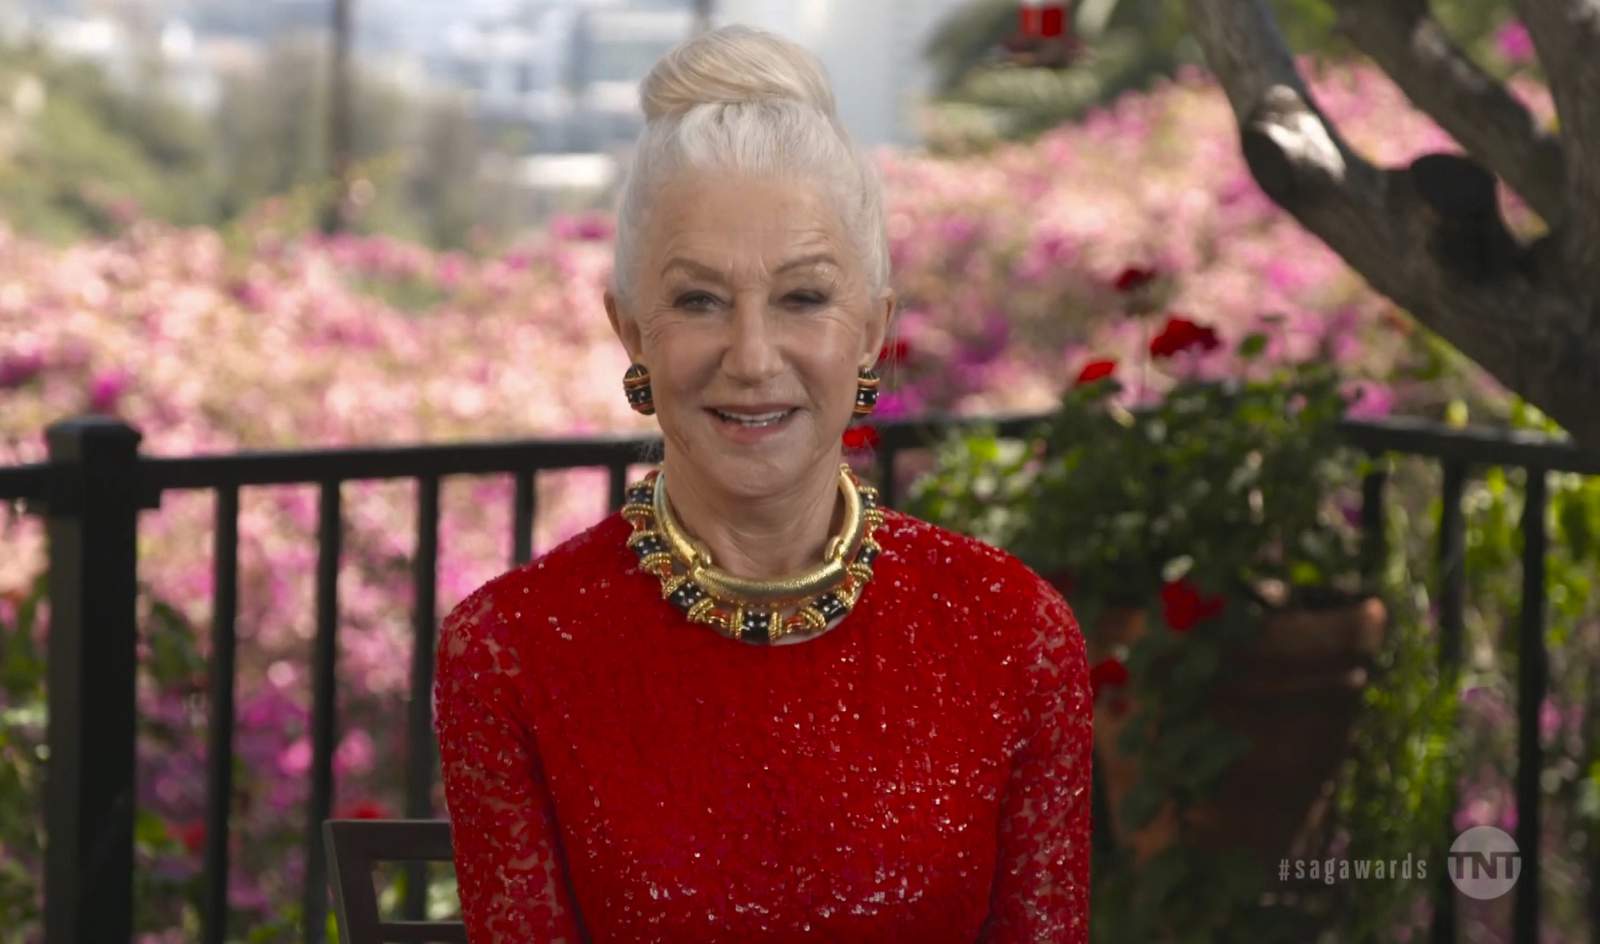 Helen Mirren finds bright side during the pandemic